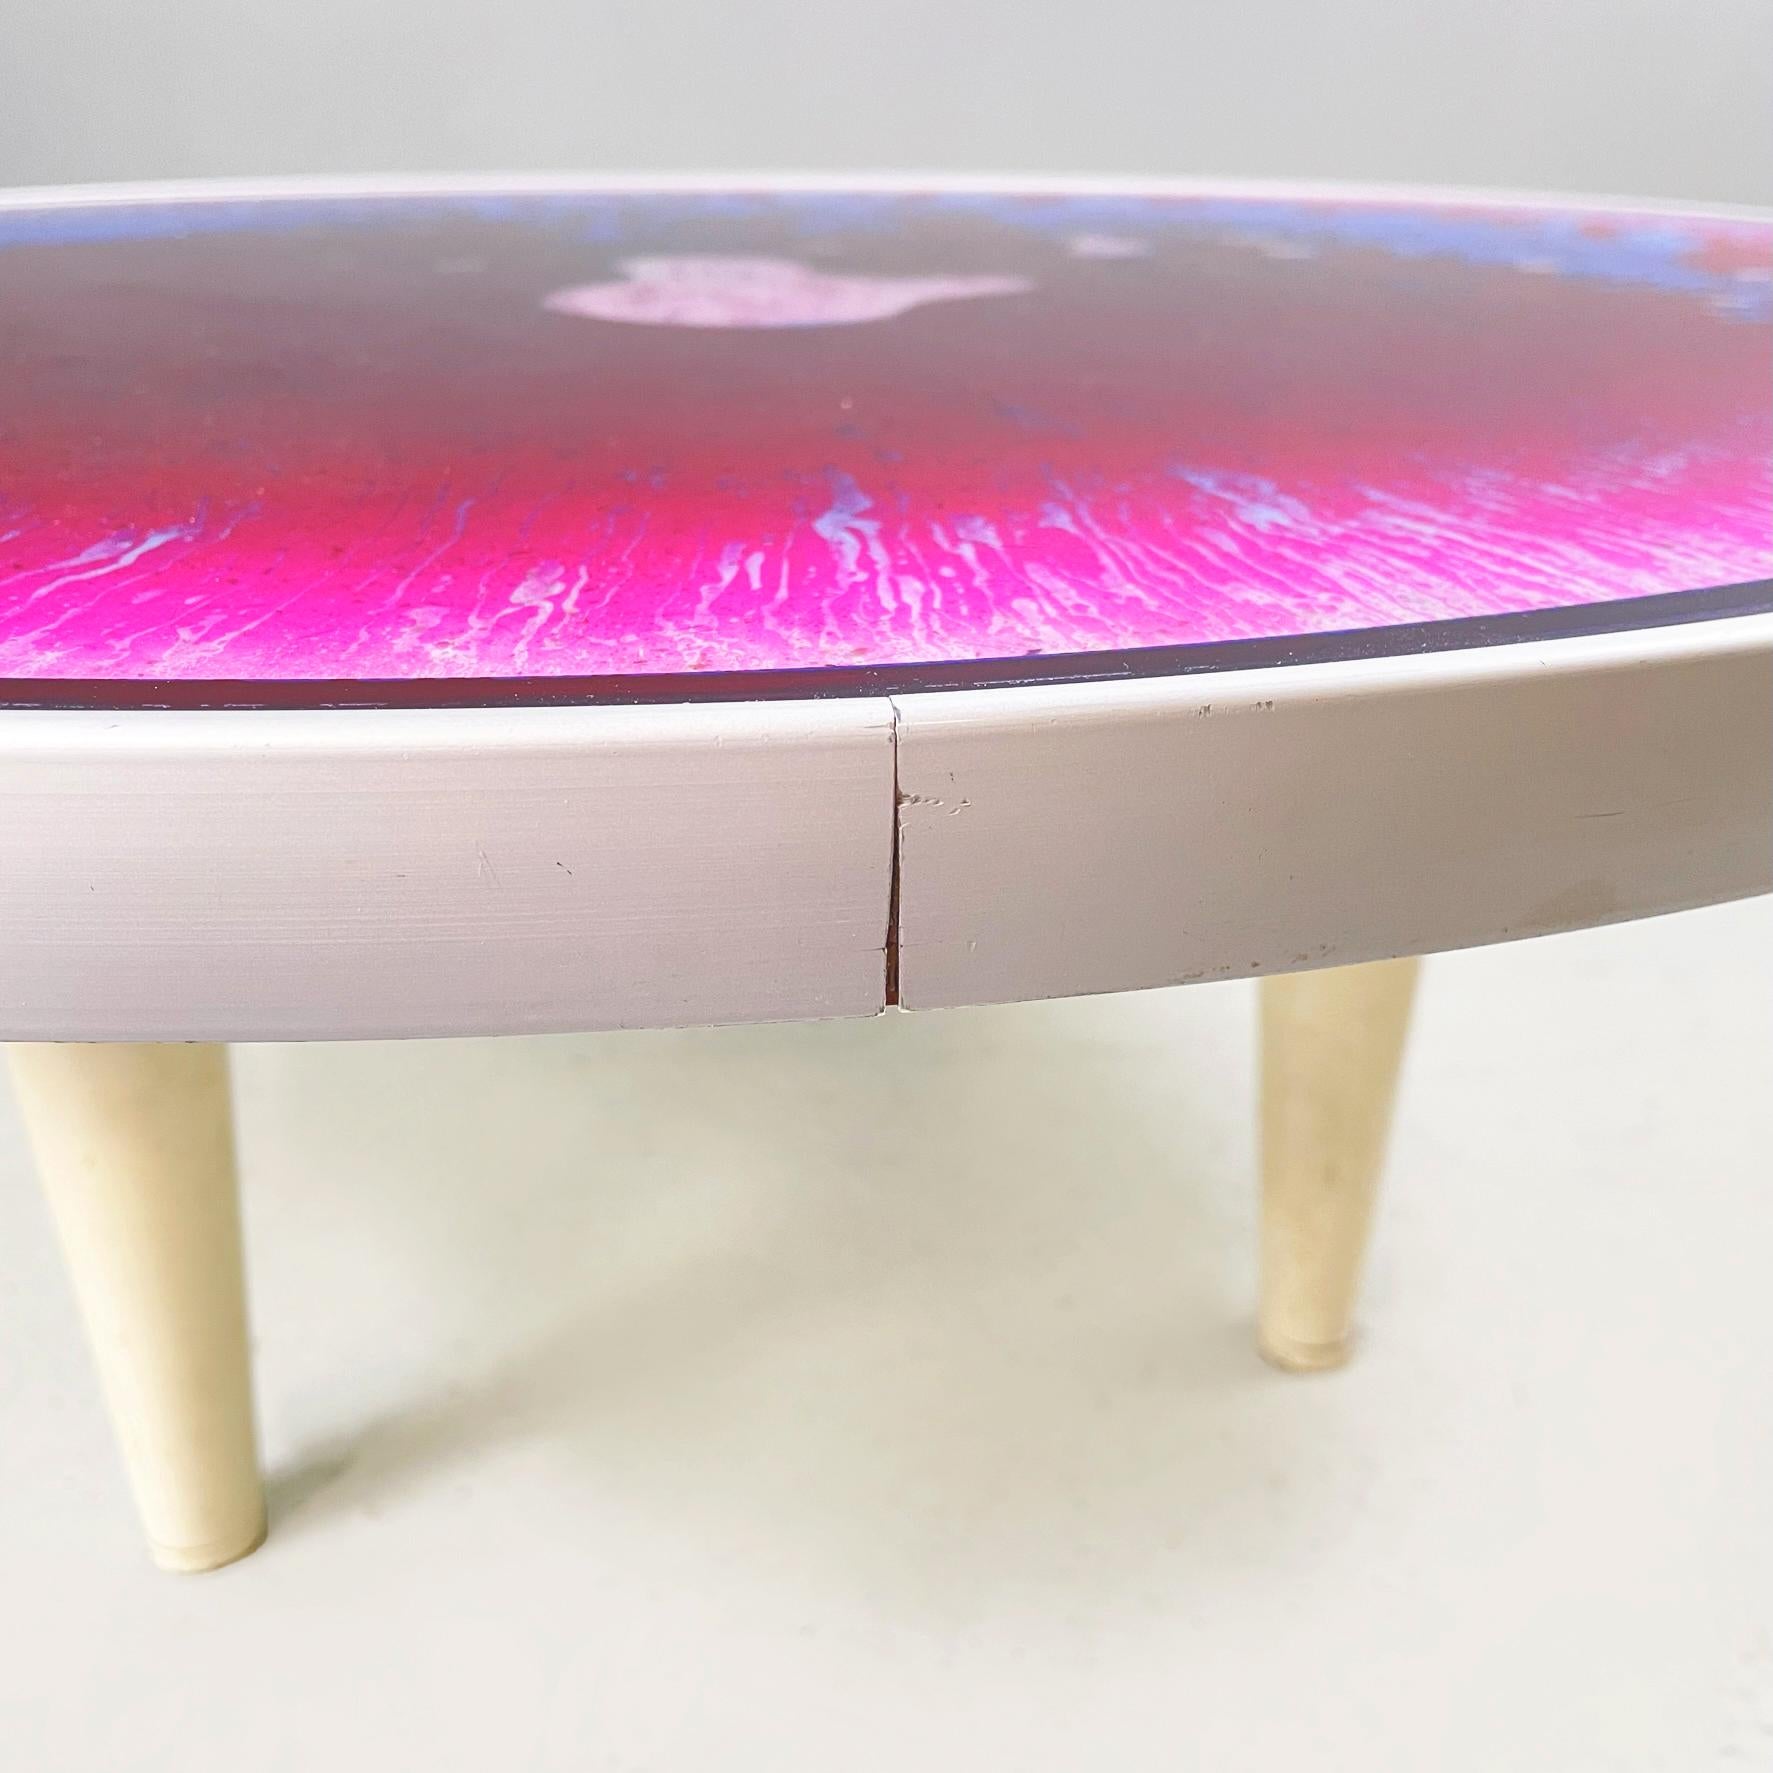 Italian Space Age Plastic and Metal Round Coffee Table with Tie Dye Effect 1970s For Sale 2